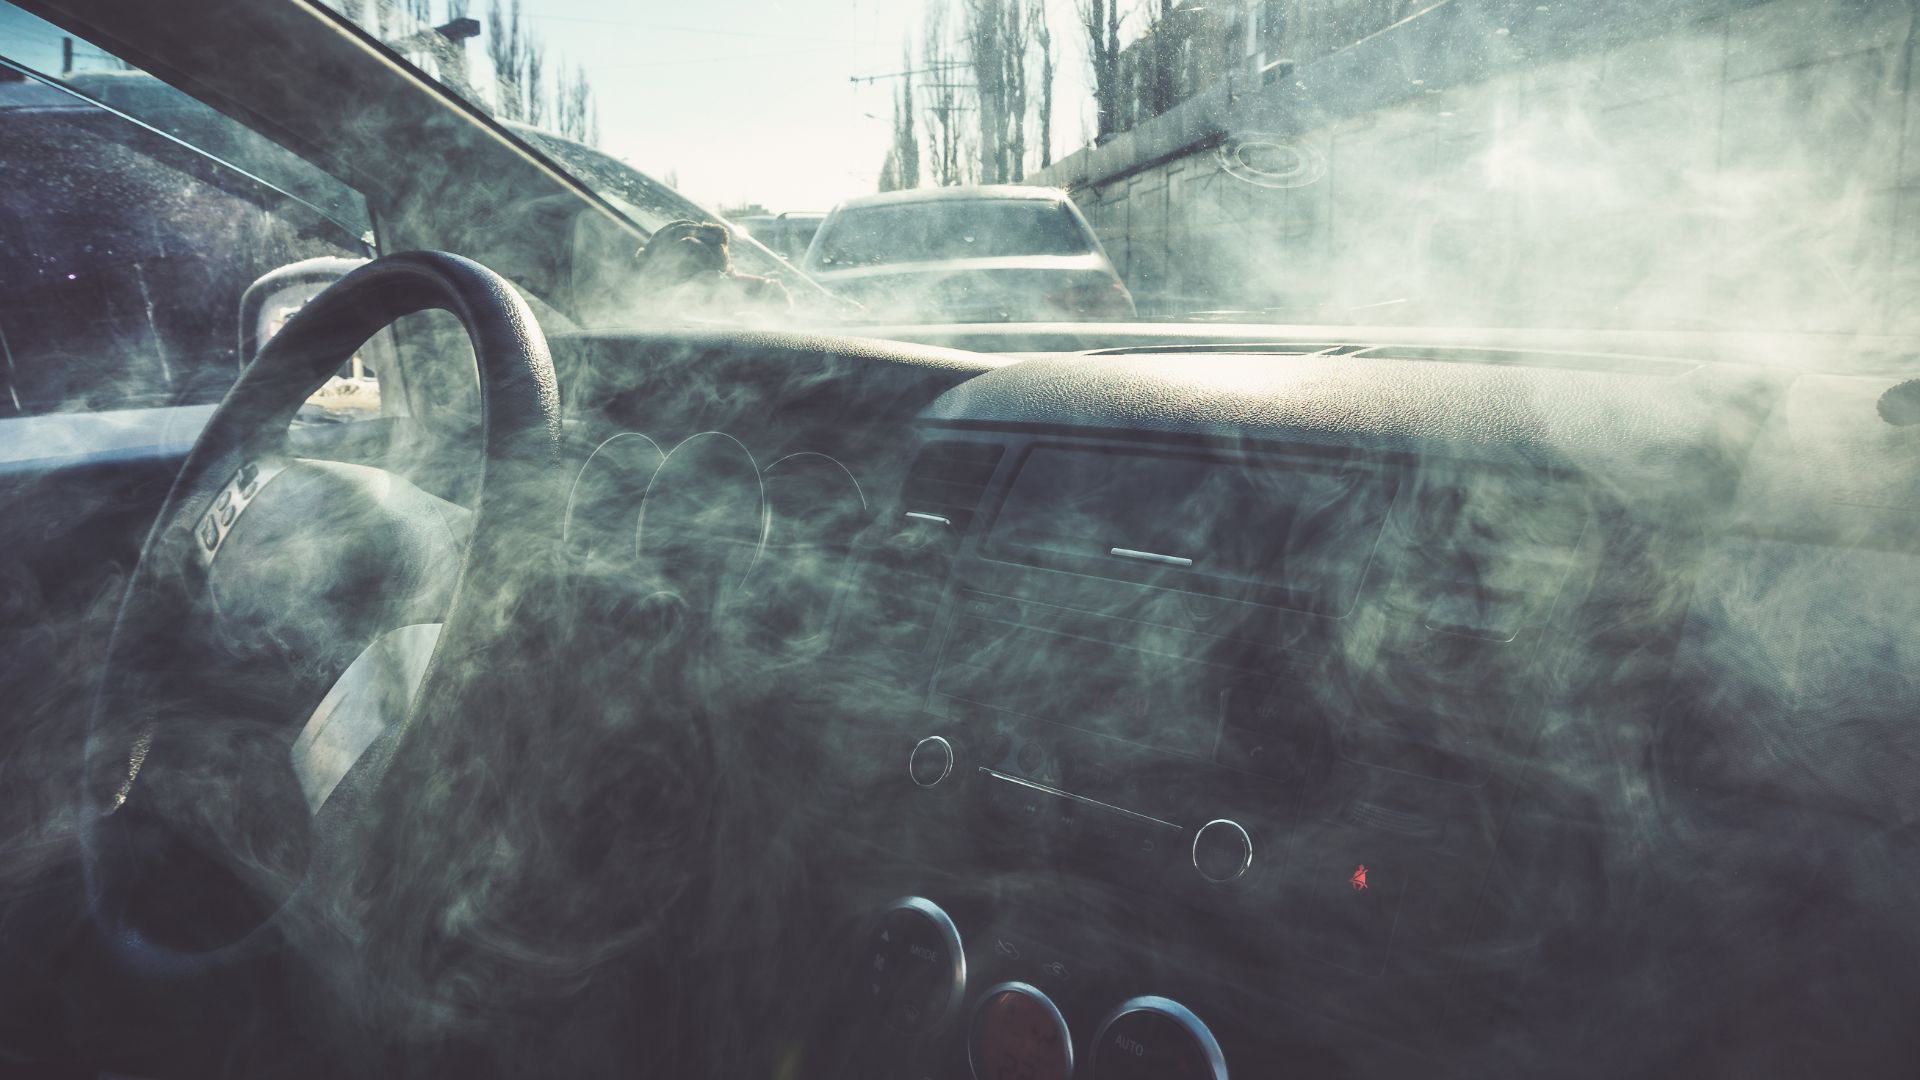 Vaping while driving could soon invalidate an insurance claim